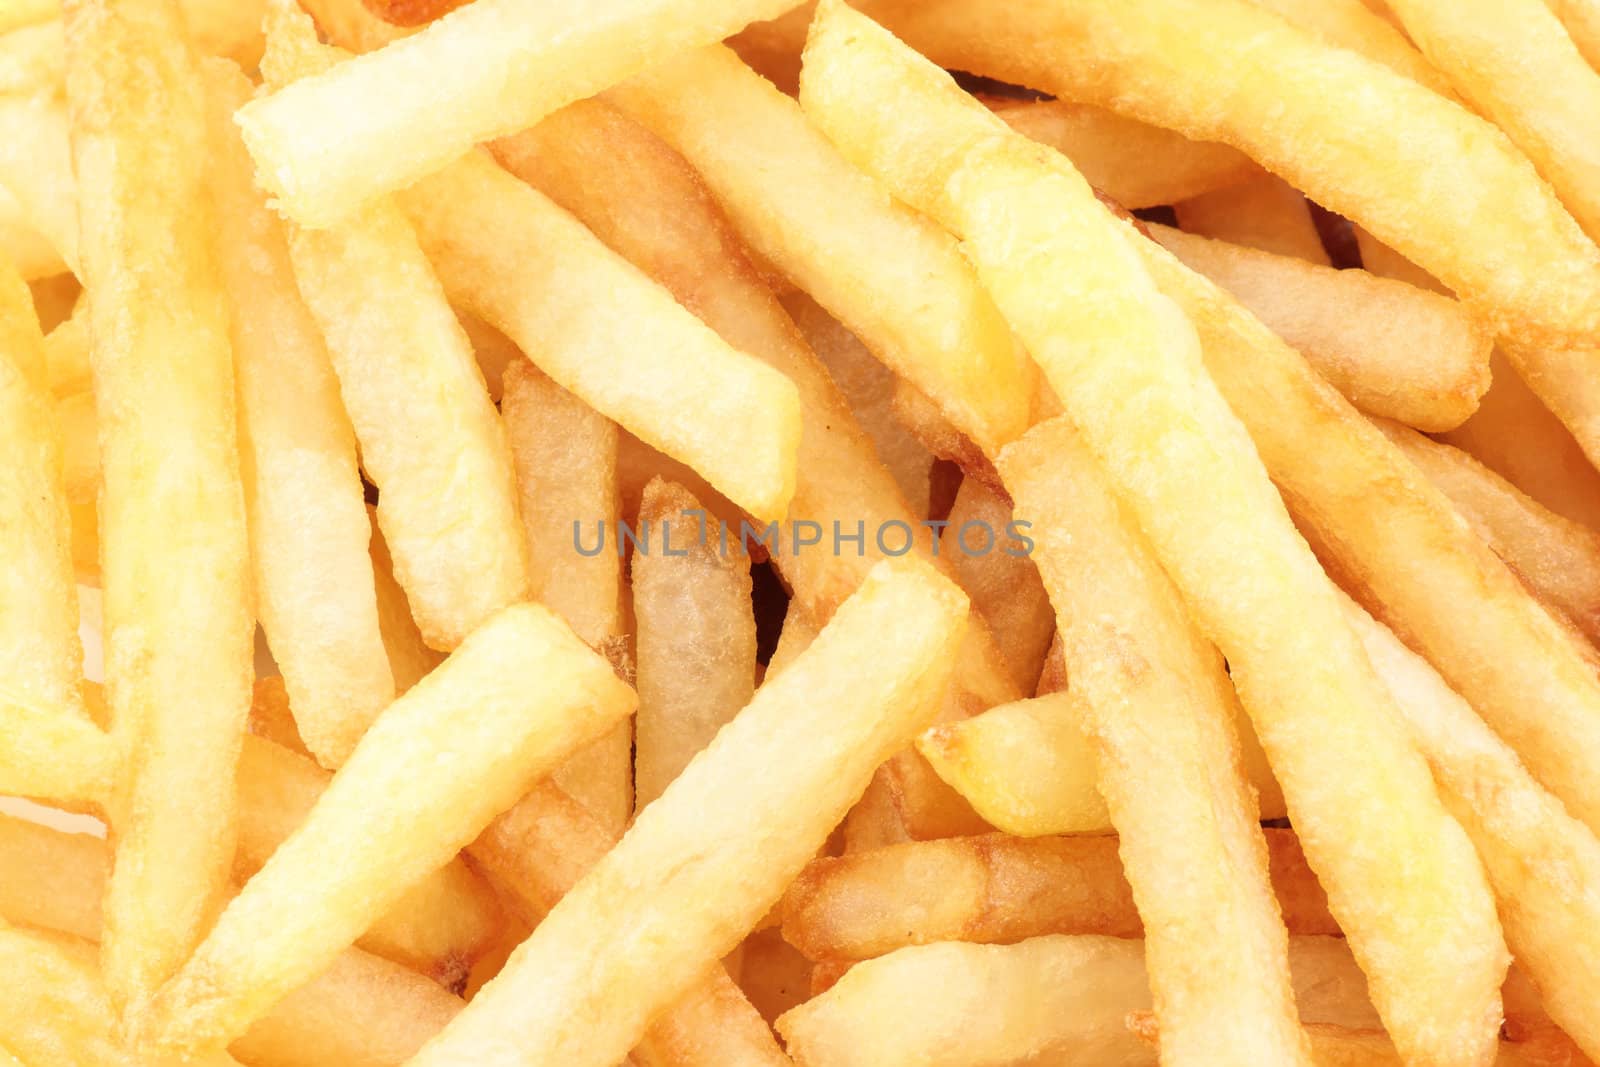 fund of golden crispy fries and tasty